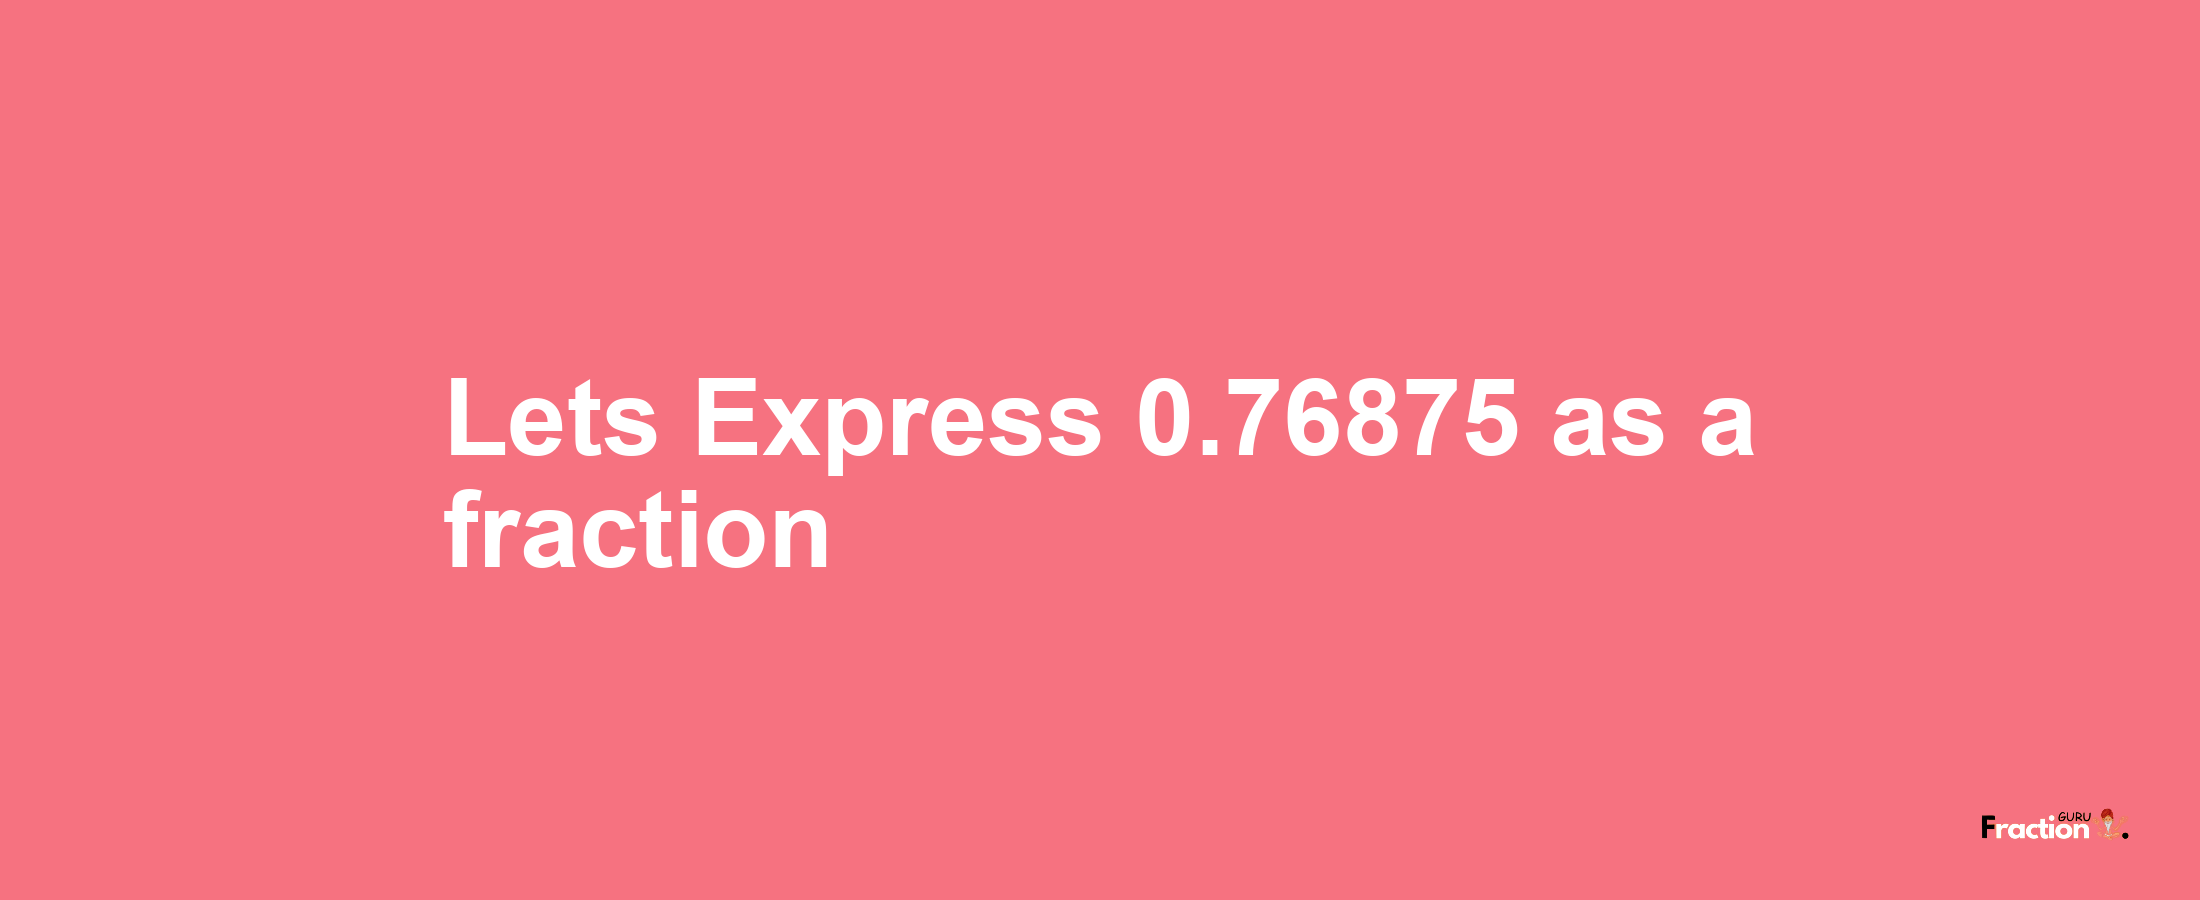 Lets Express 0.76875 as afraction